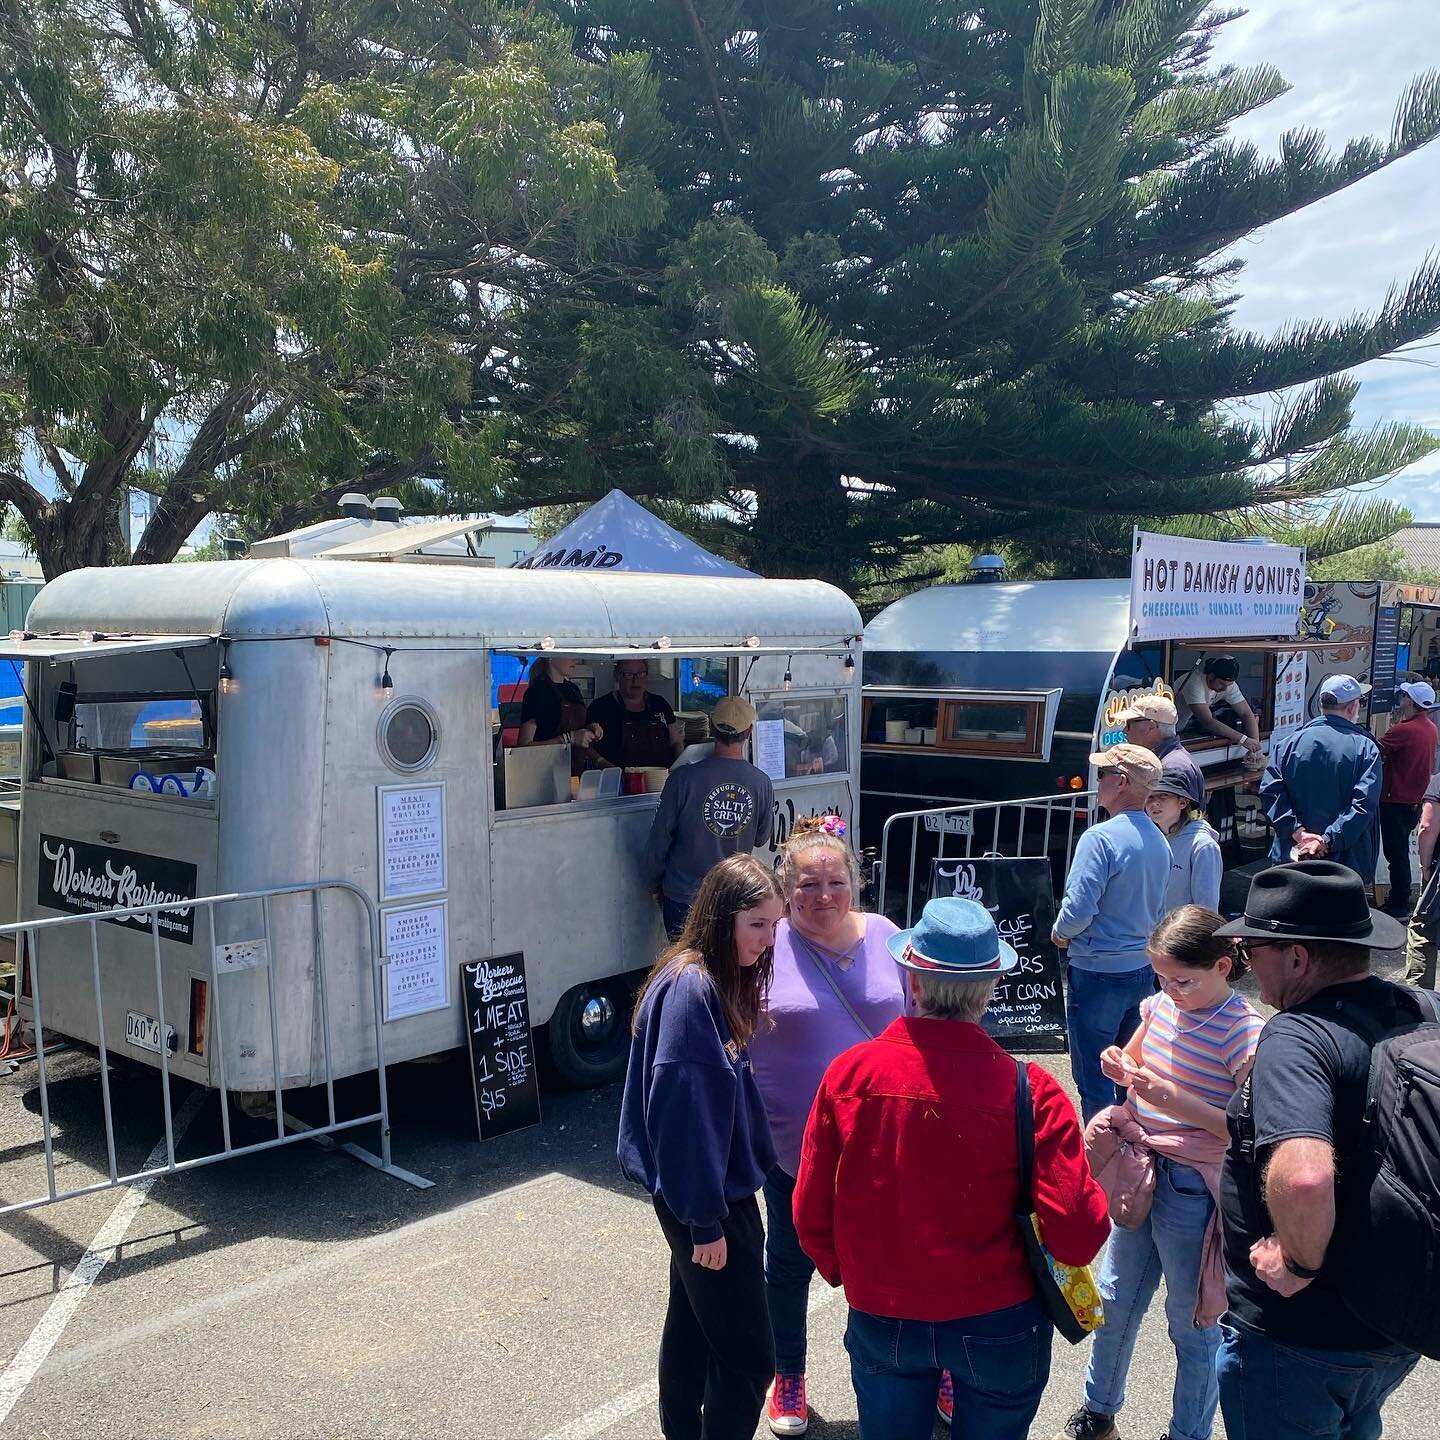 Well&hellip; we survived @queenscliff_music_festival! We learnt a lot, served some awesome humans and made some cool friends to add to our food truck fam! 🥰

We hope if you visited us over the weekend that we were fast and tasty! 🍔